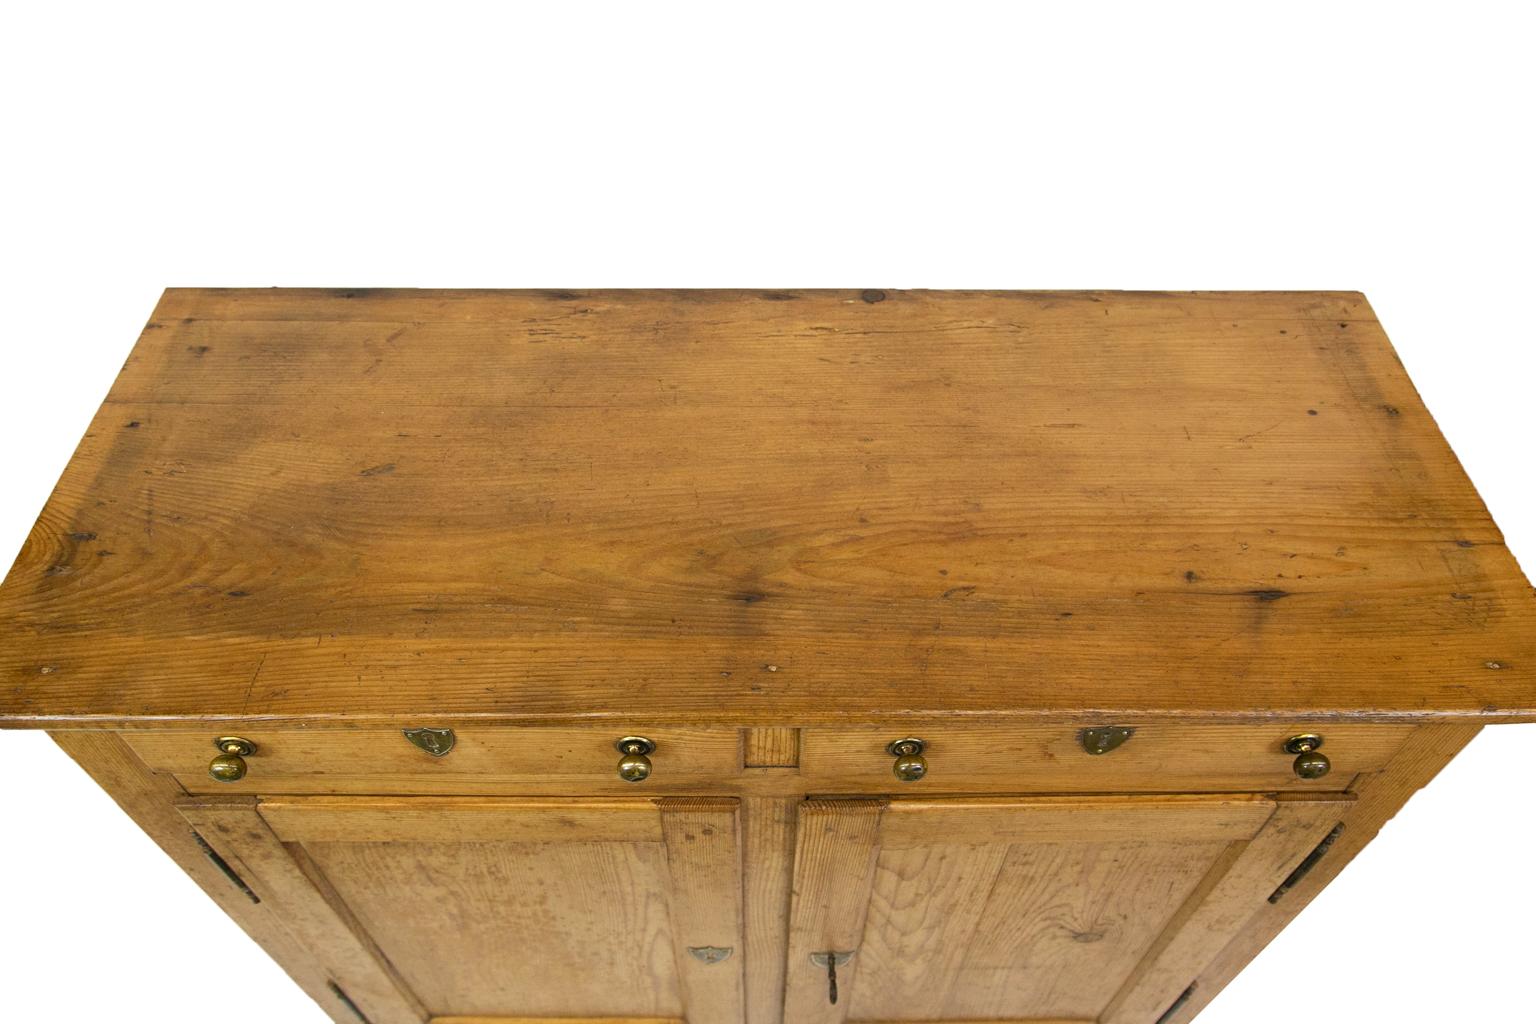 French pine buffet, the doors on this pine French buffet have double exposed peg construction. It has the original hinges and later lock with working key. The sides are chamfered and end in bun feet.